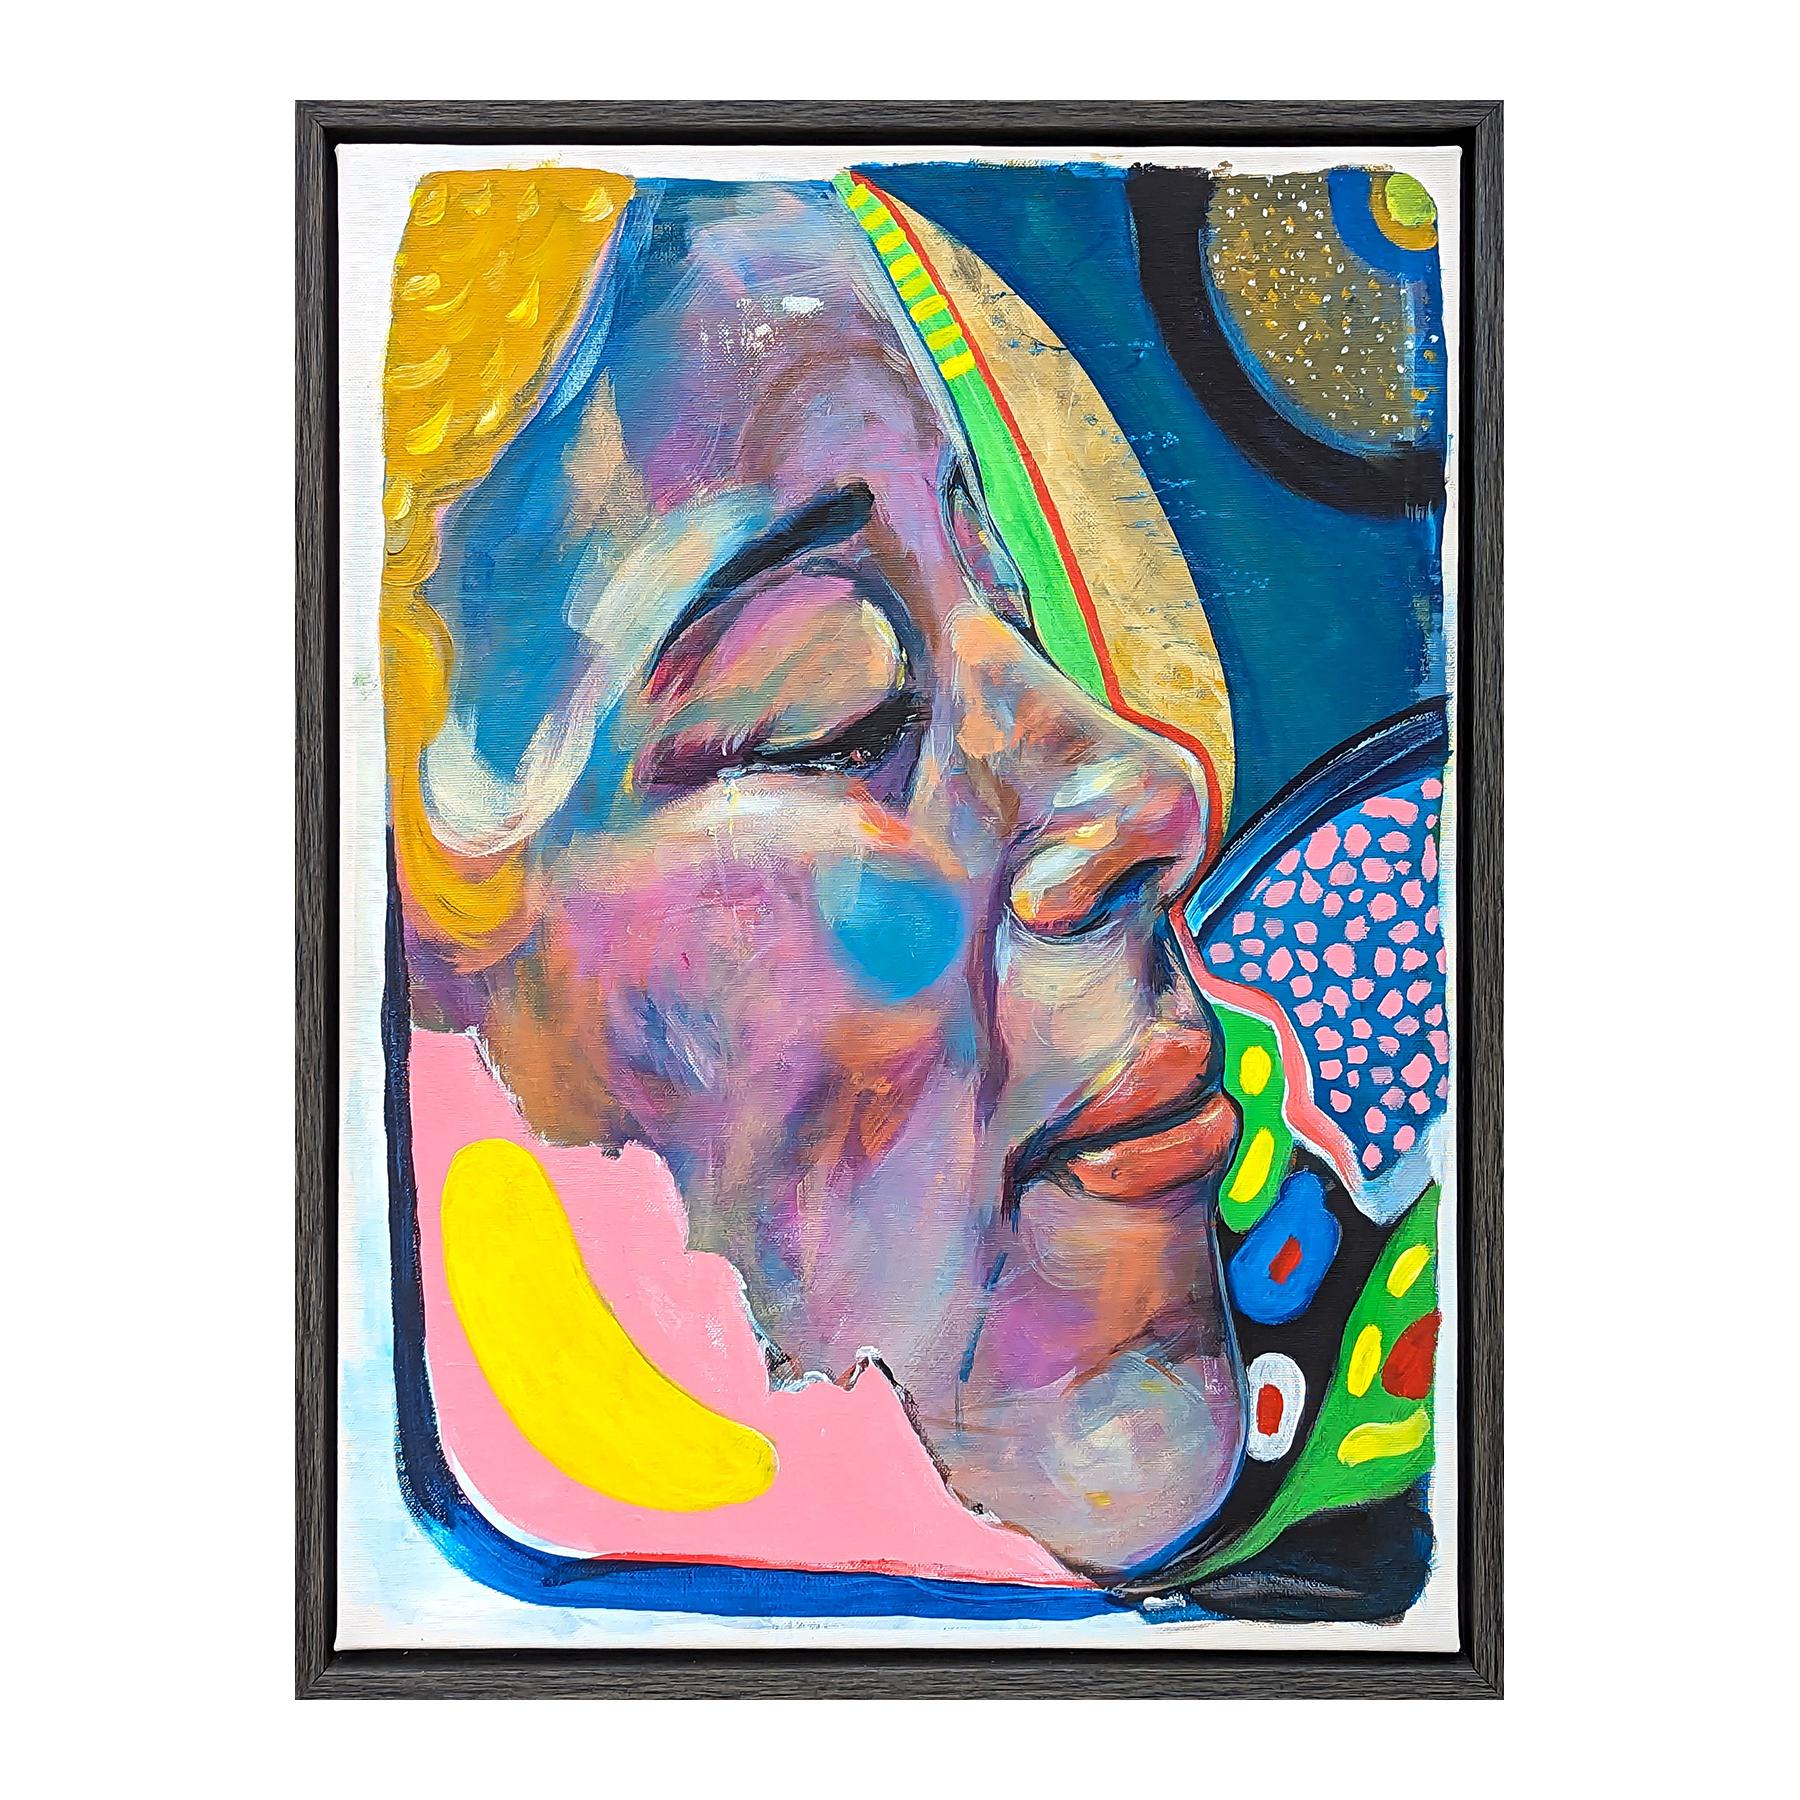 Contemporary colorful figurative painting by Houston-based artist Moisés Villafuerte. The work features a close up view of a face set against a blue, pink, green and yellow abstract background. Currently hung in a grey toned frame.  

Dimensions